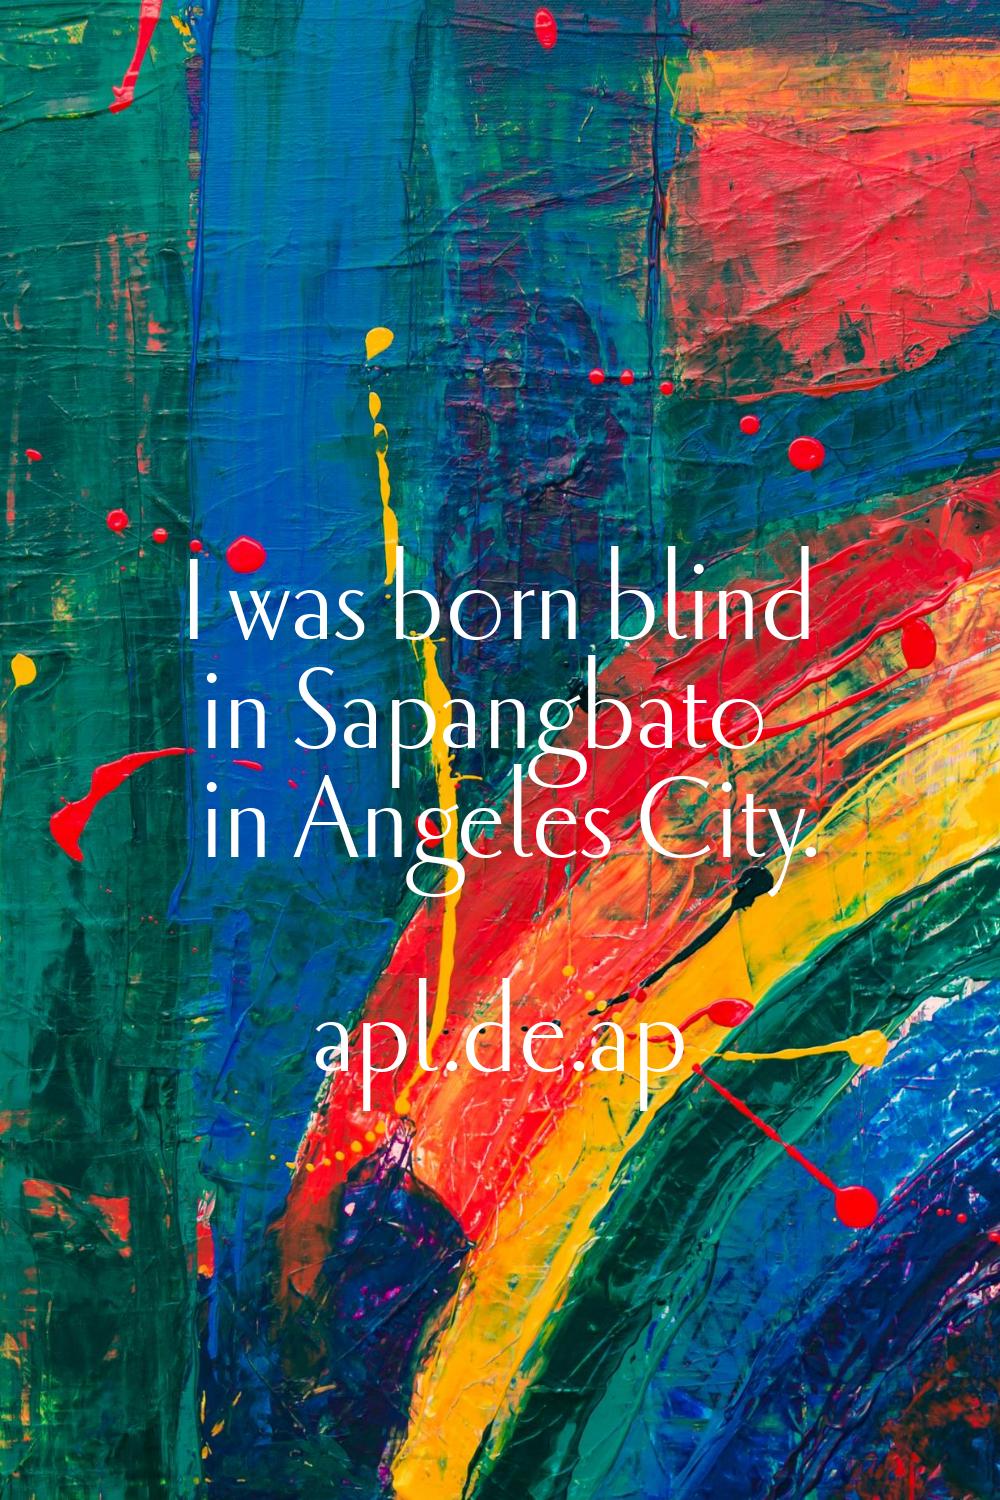 I was born blind in Sapangbato in Angeles City.